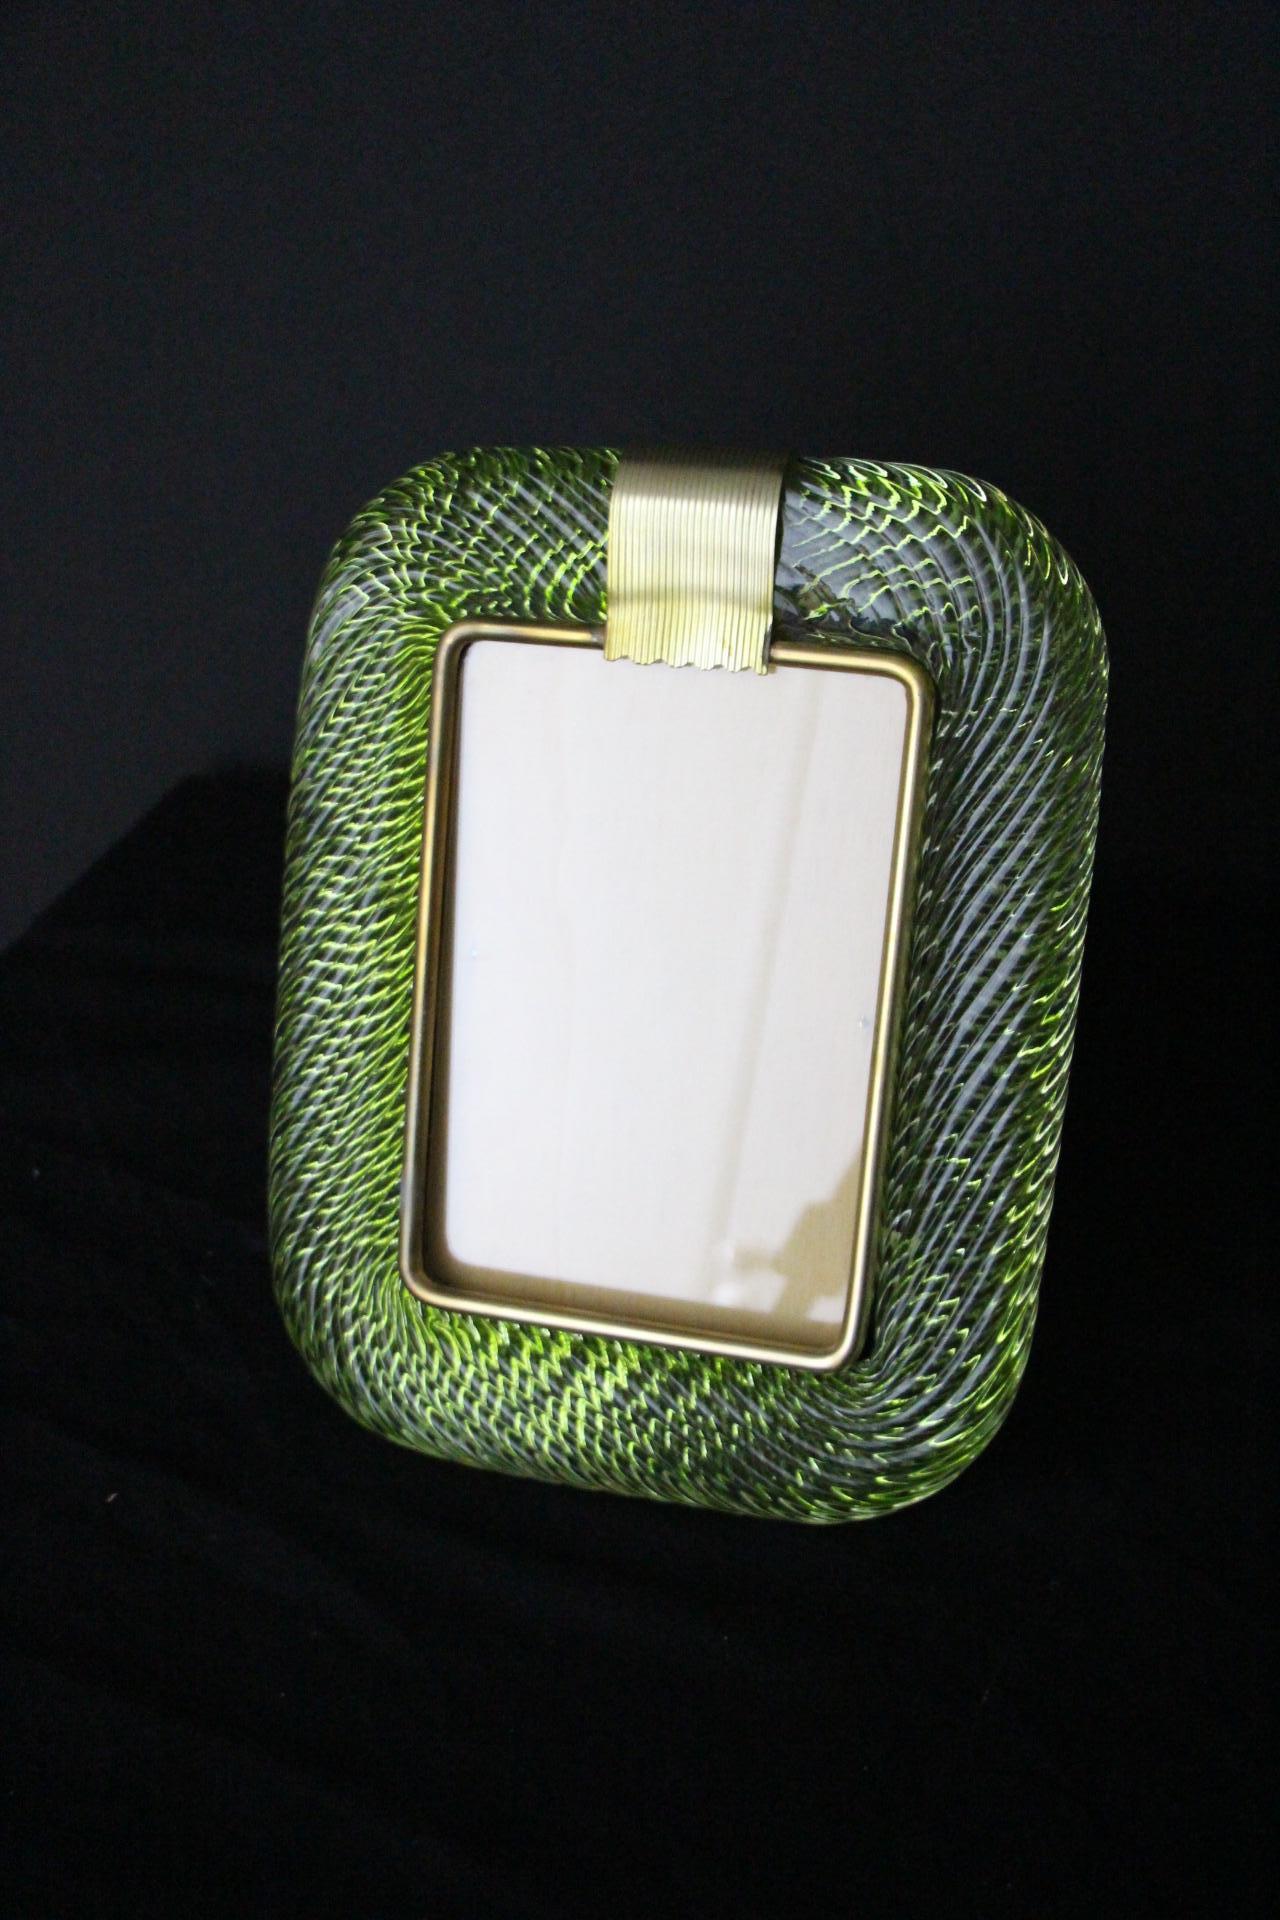 2000's Olive Green Twisted Murano Glass and Brass Photo Frame by Barovier e Toso For Sale 5